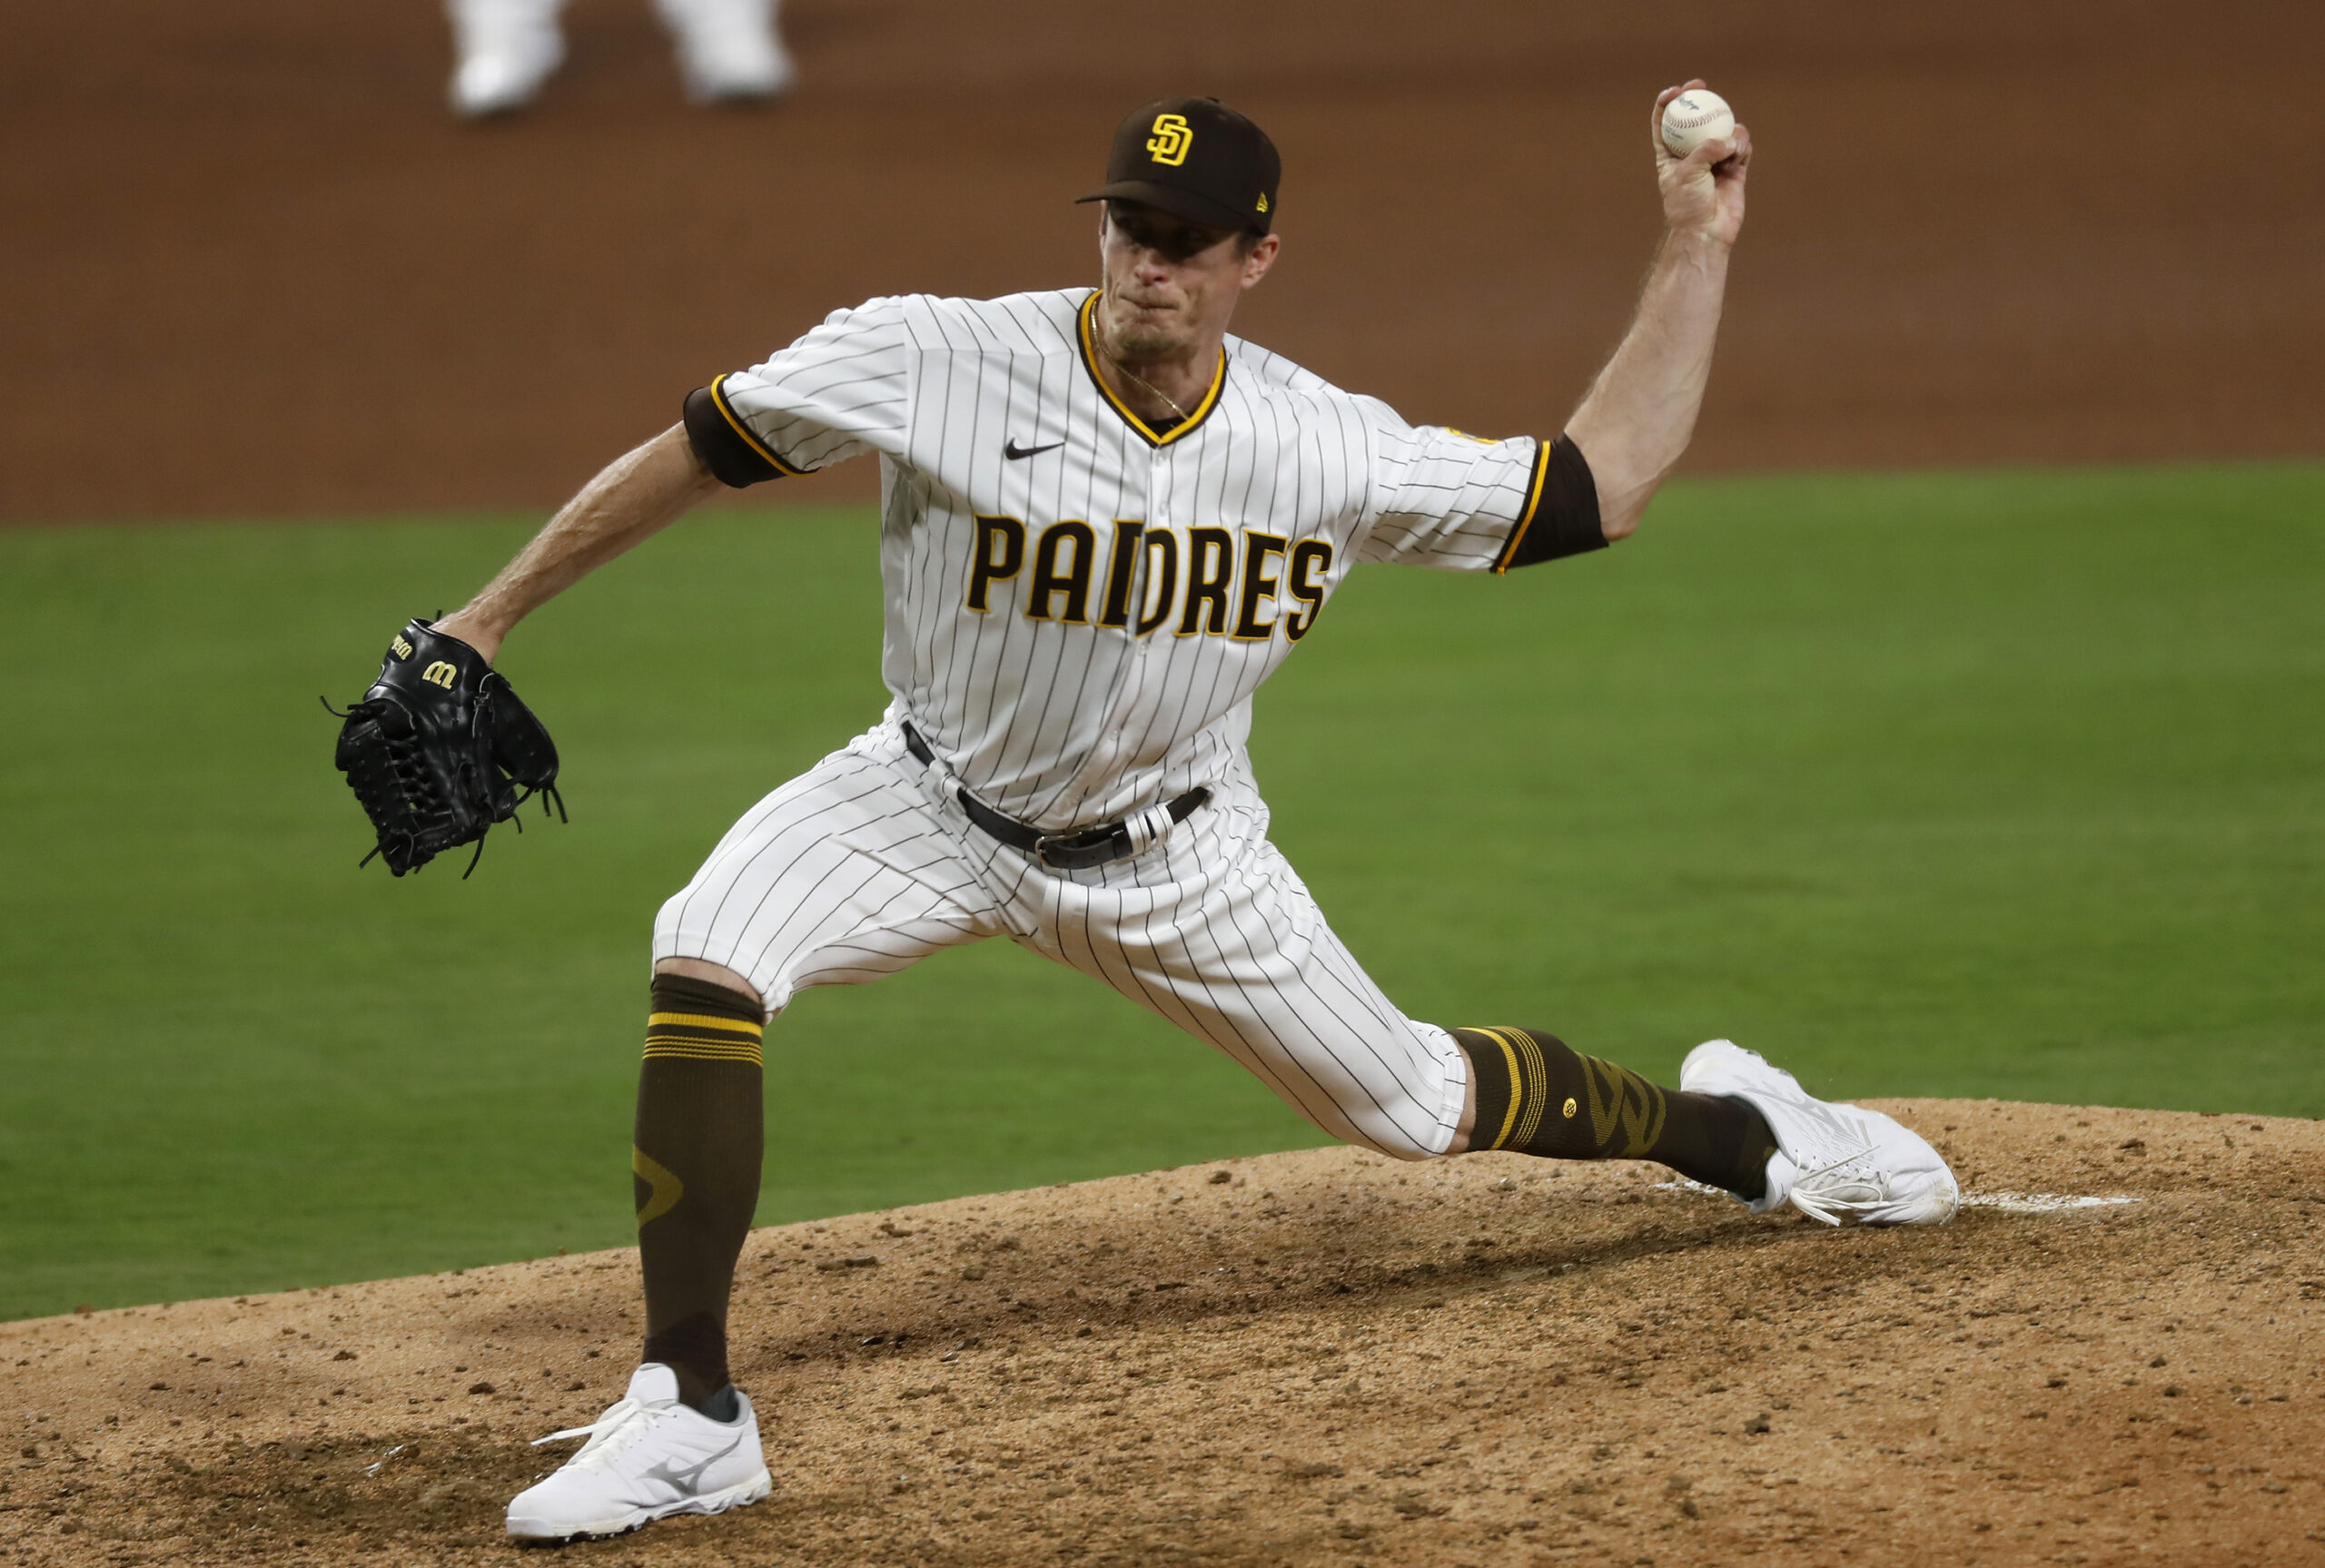 San Diego Padres pitcher Tim Hill throws in the seventh inning against the Los Angeles Dodgers at Petco Park in San Diego on Tuesday, Aug. 4, 2020.